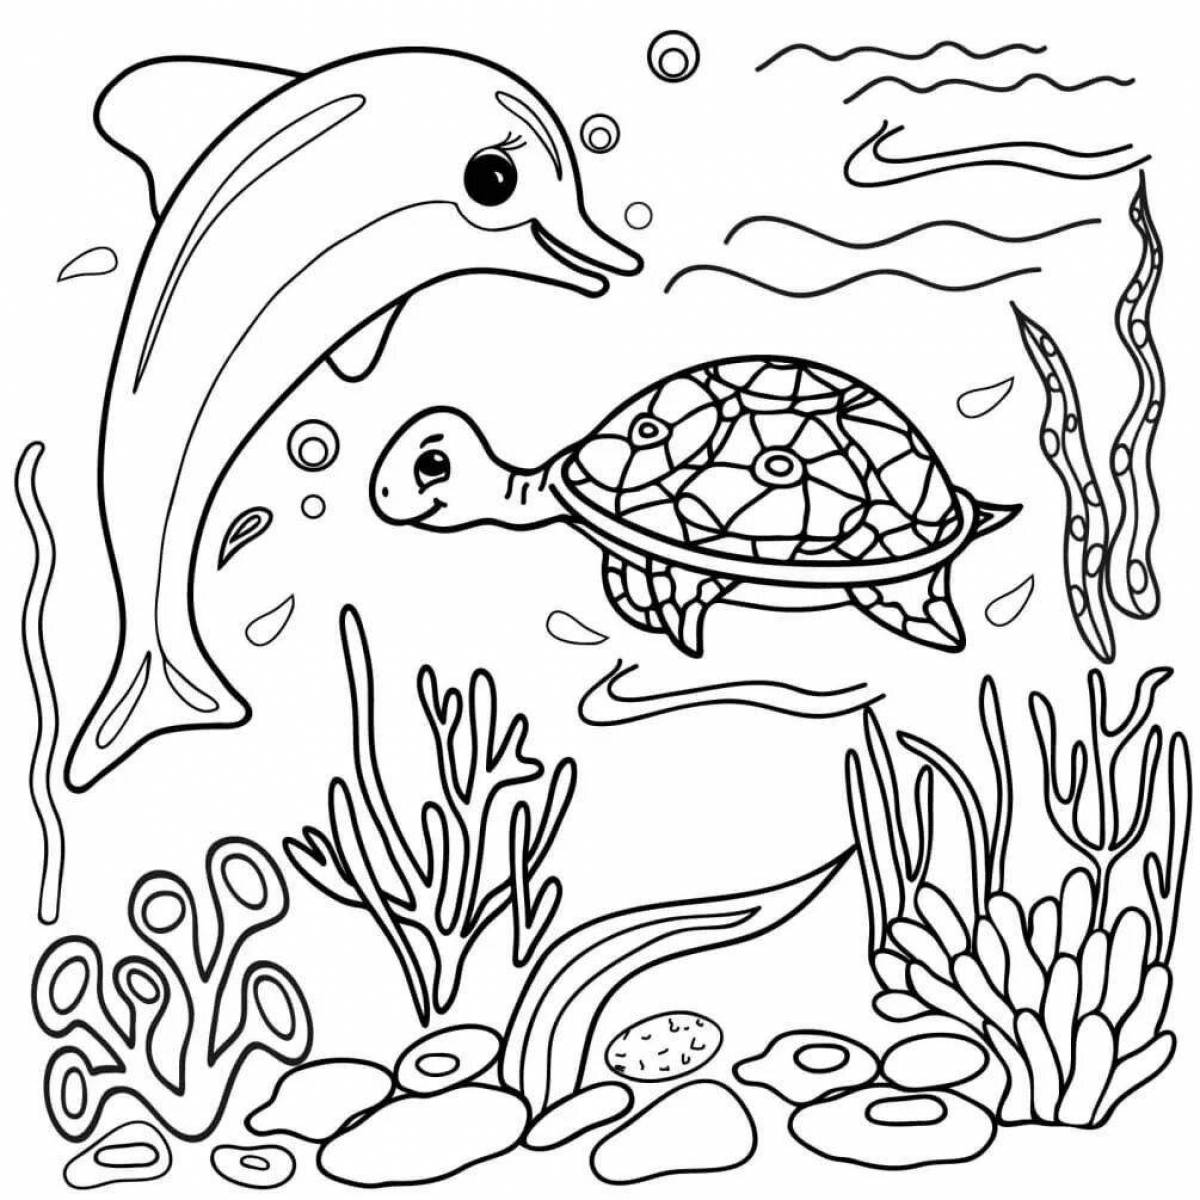 Shiny seabed coloring page for kids